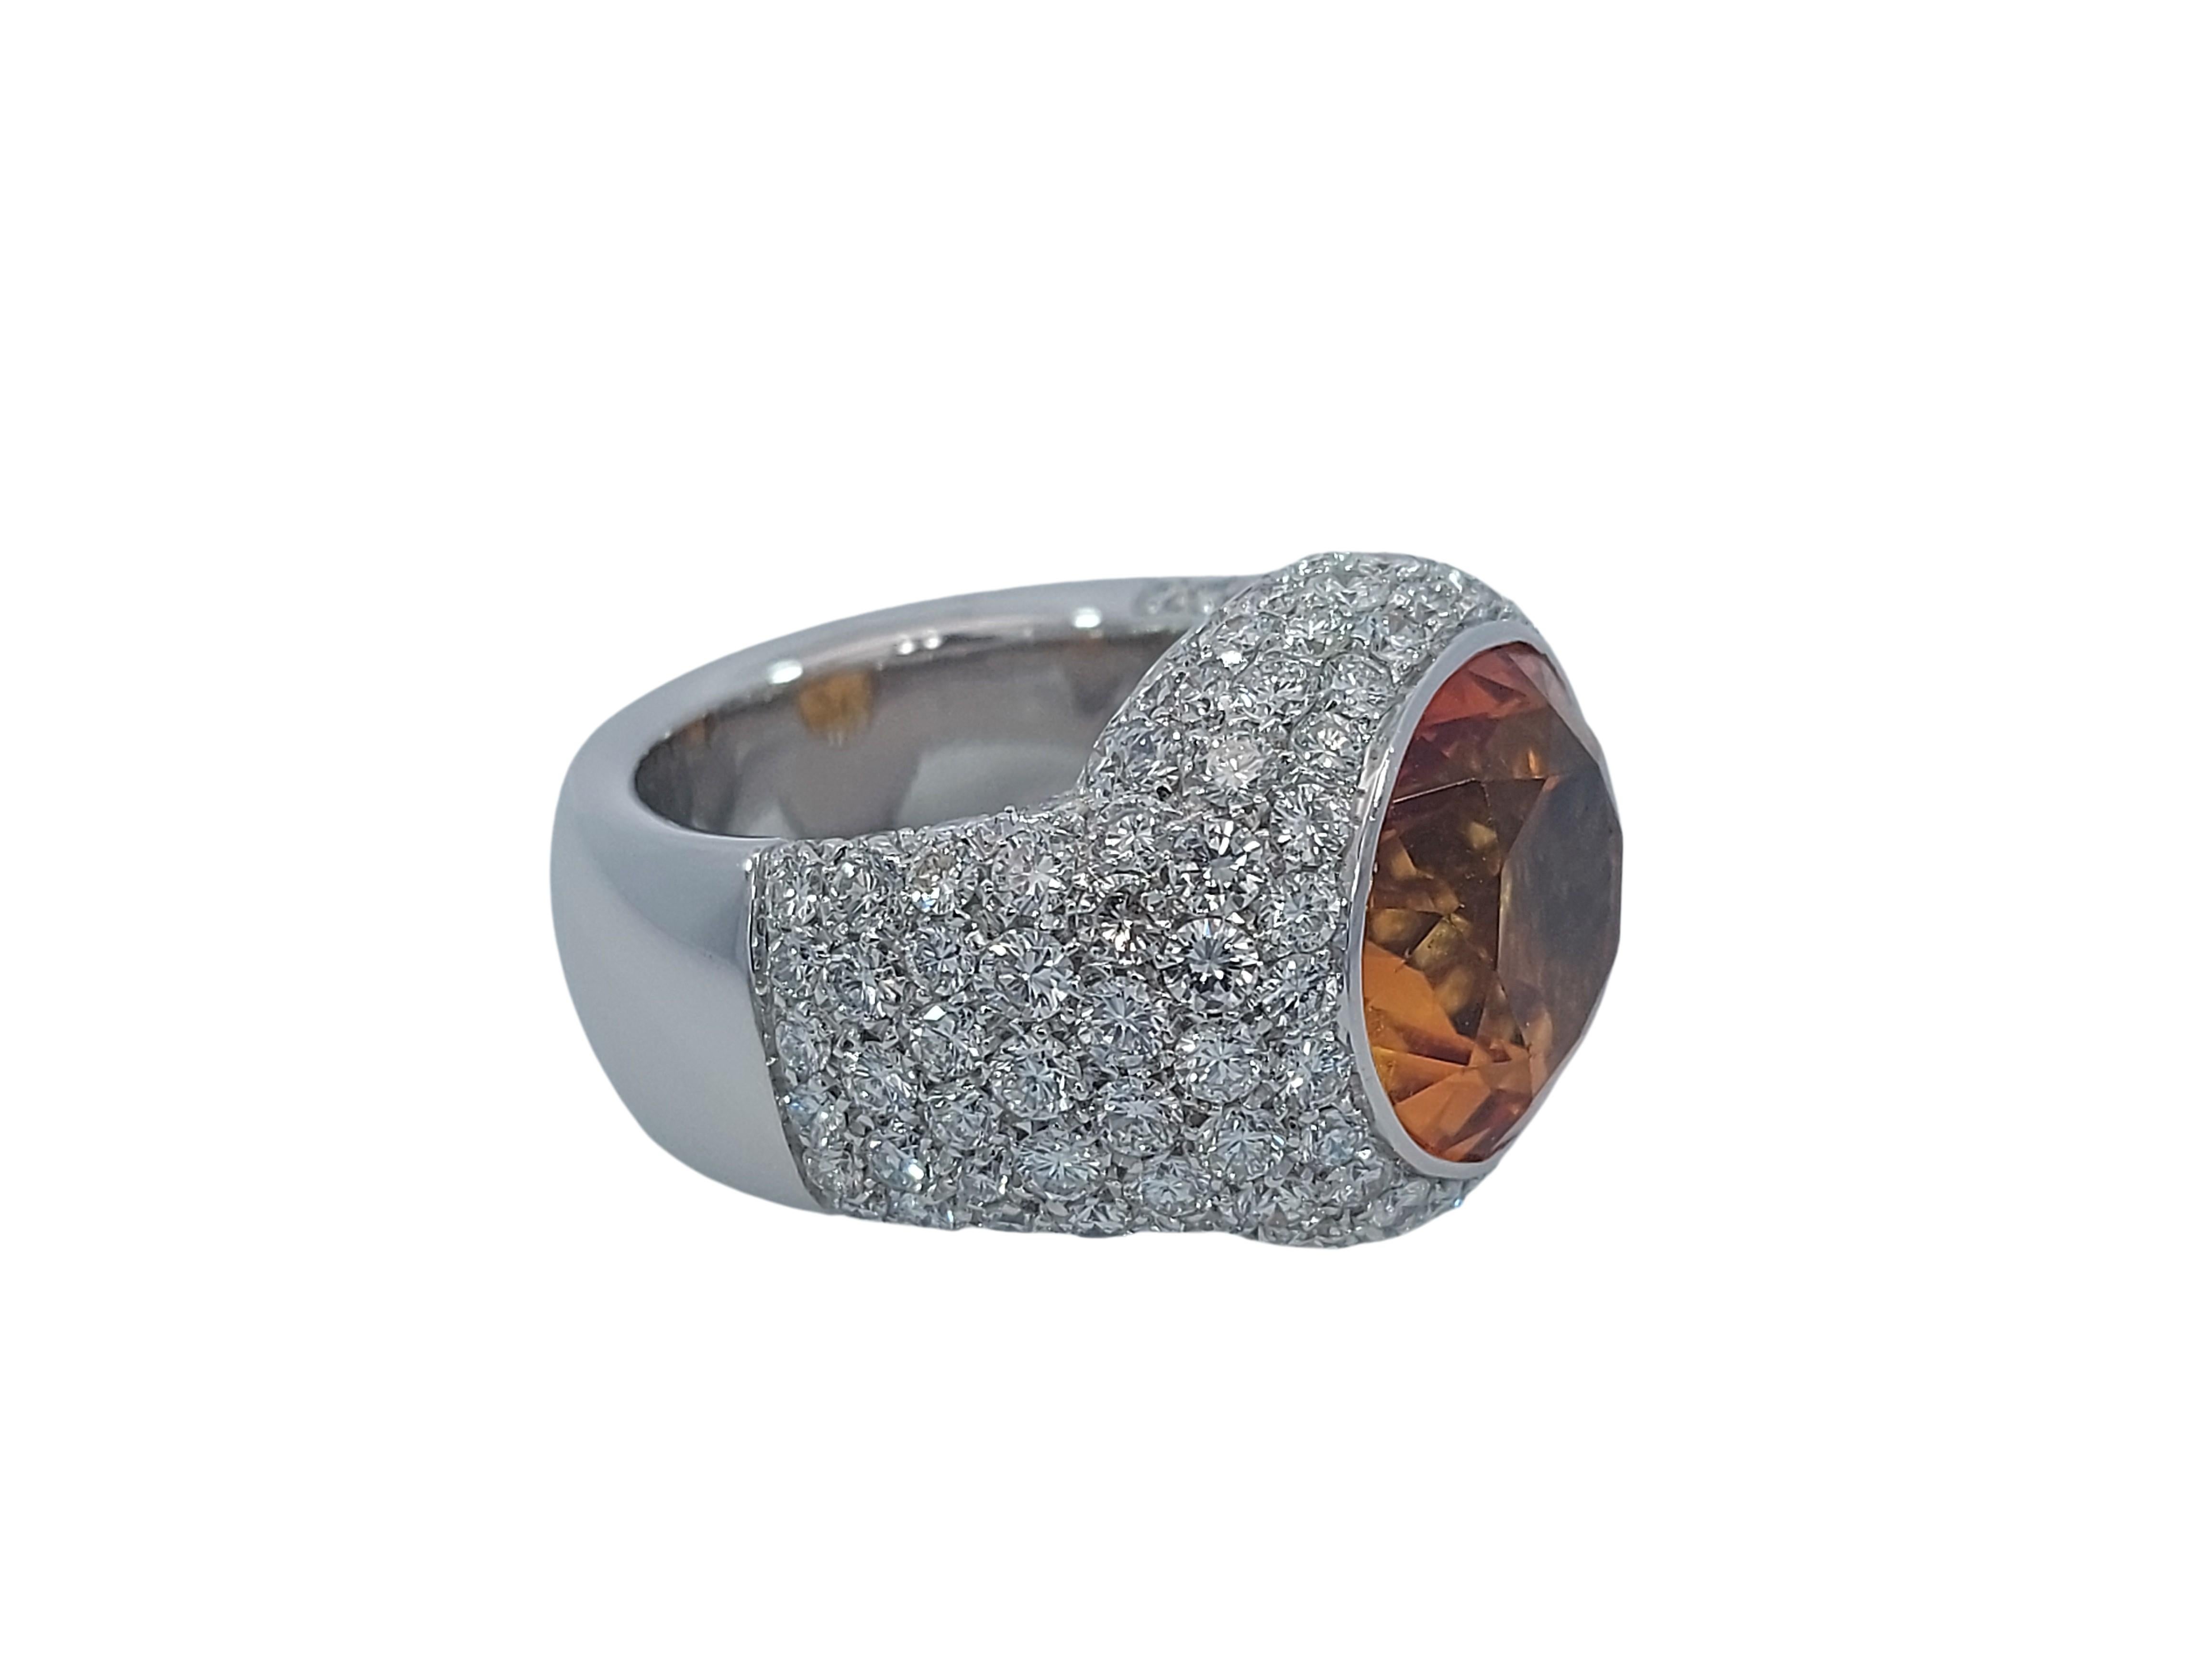 Stunning 18kt Solid White Gold Ring with 6.4ct Diamonds and Big Citrine Stone For Sale 3